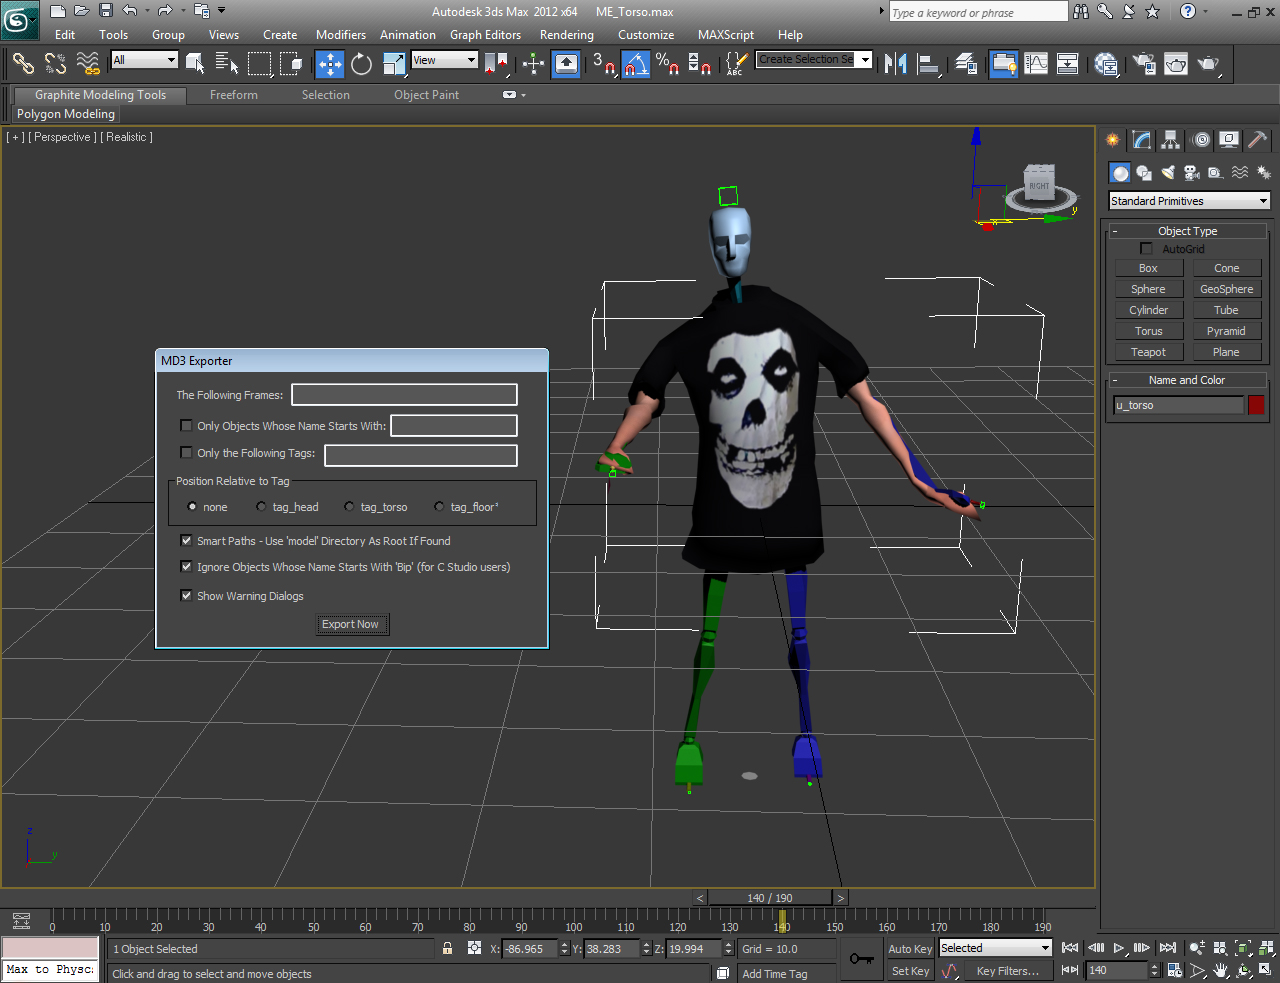 More information about "3ds Max 2012 32bit/64bit MD3 Exporter"